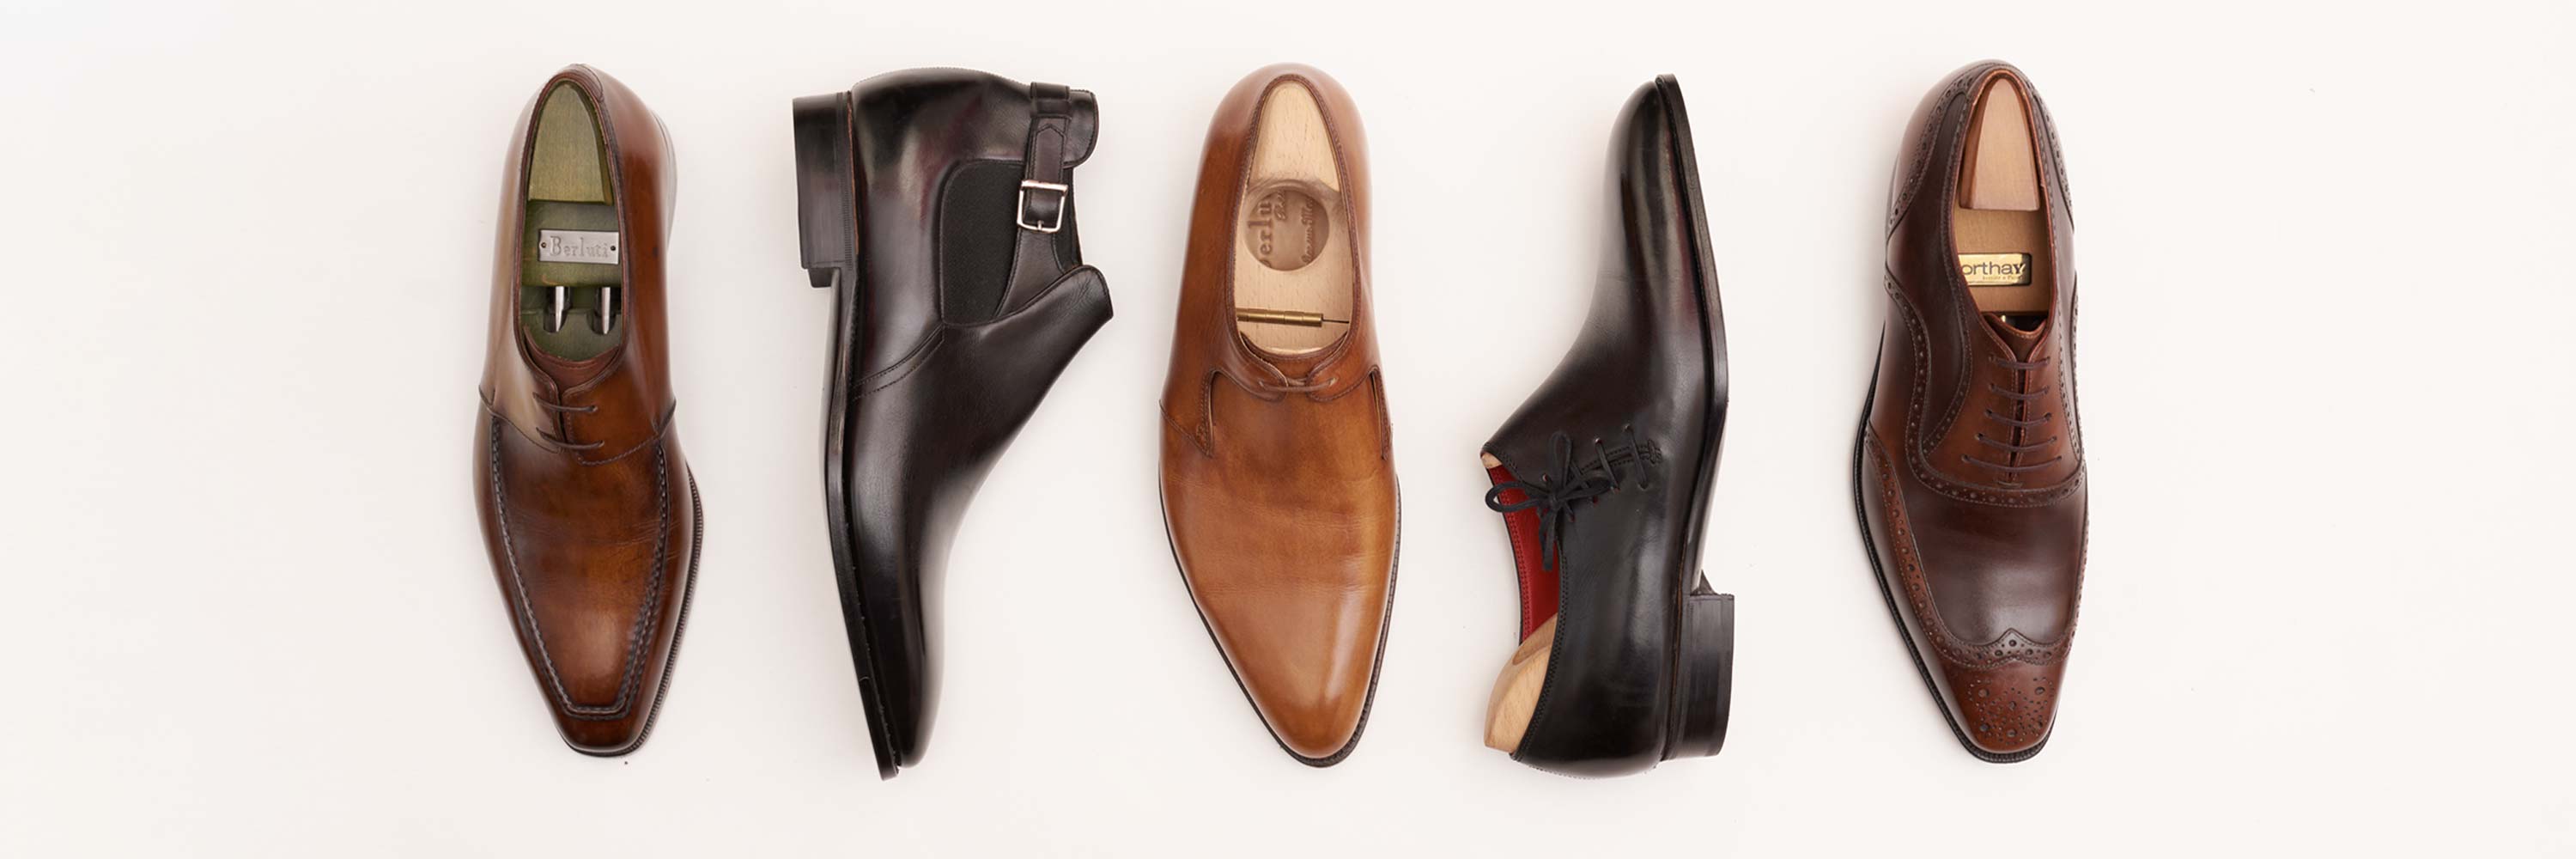 Handmade Shoes at Sartoriale.com - The Luxury Store for Men -